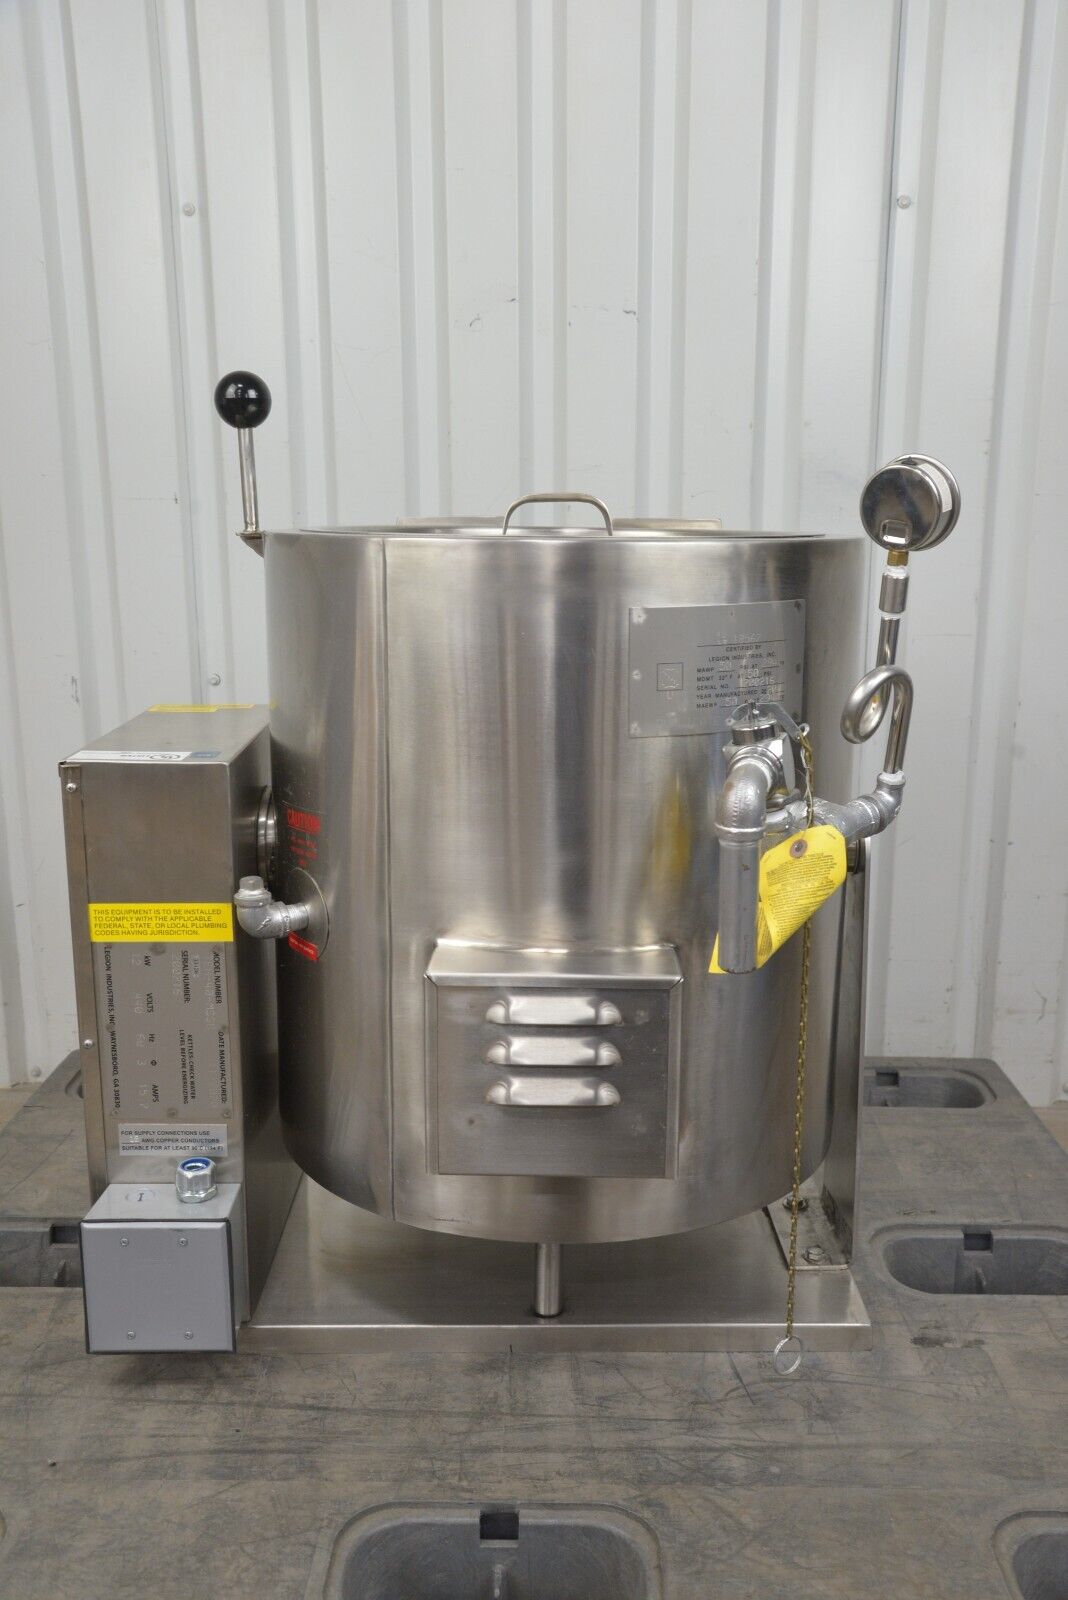 https://www.rhinotradellc.com/wp-content/uploads/imported/1/Legion-TEH-40-MSSA-Electric-Steam-Insulated-Self-Contained-Kettle-185920331981-4.jpg